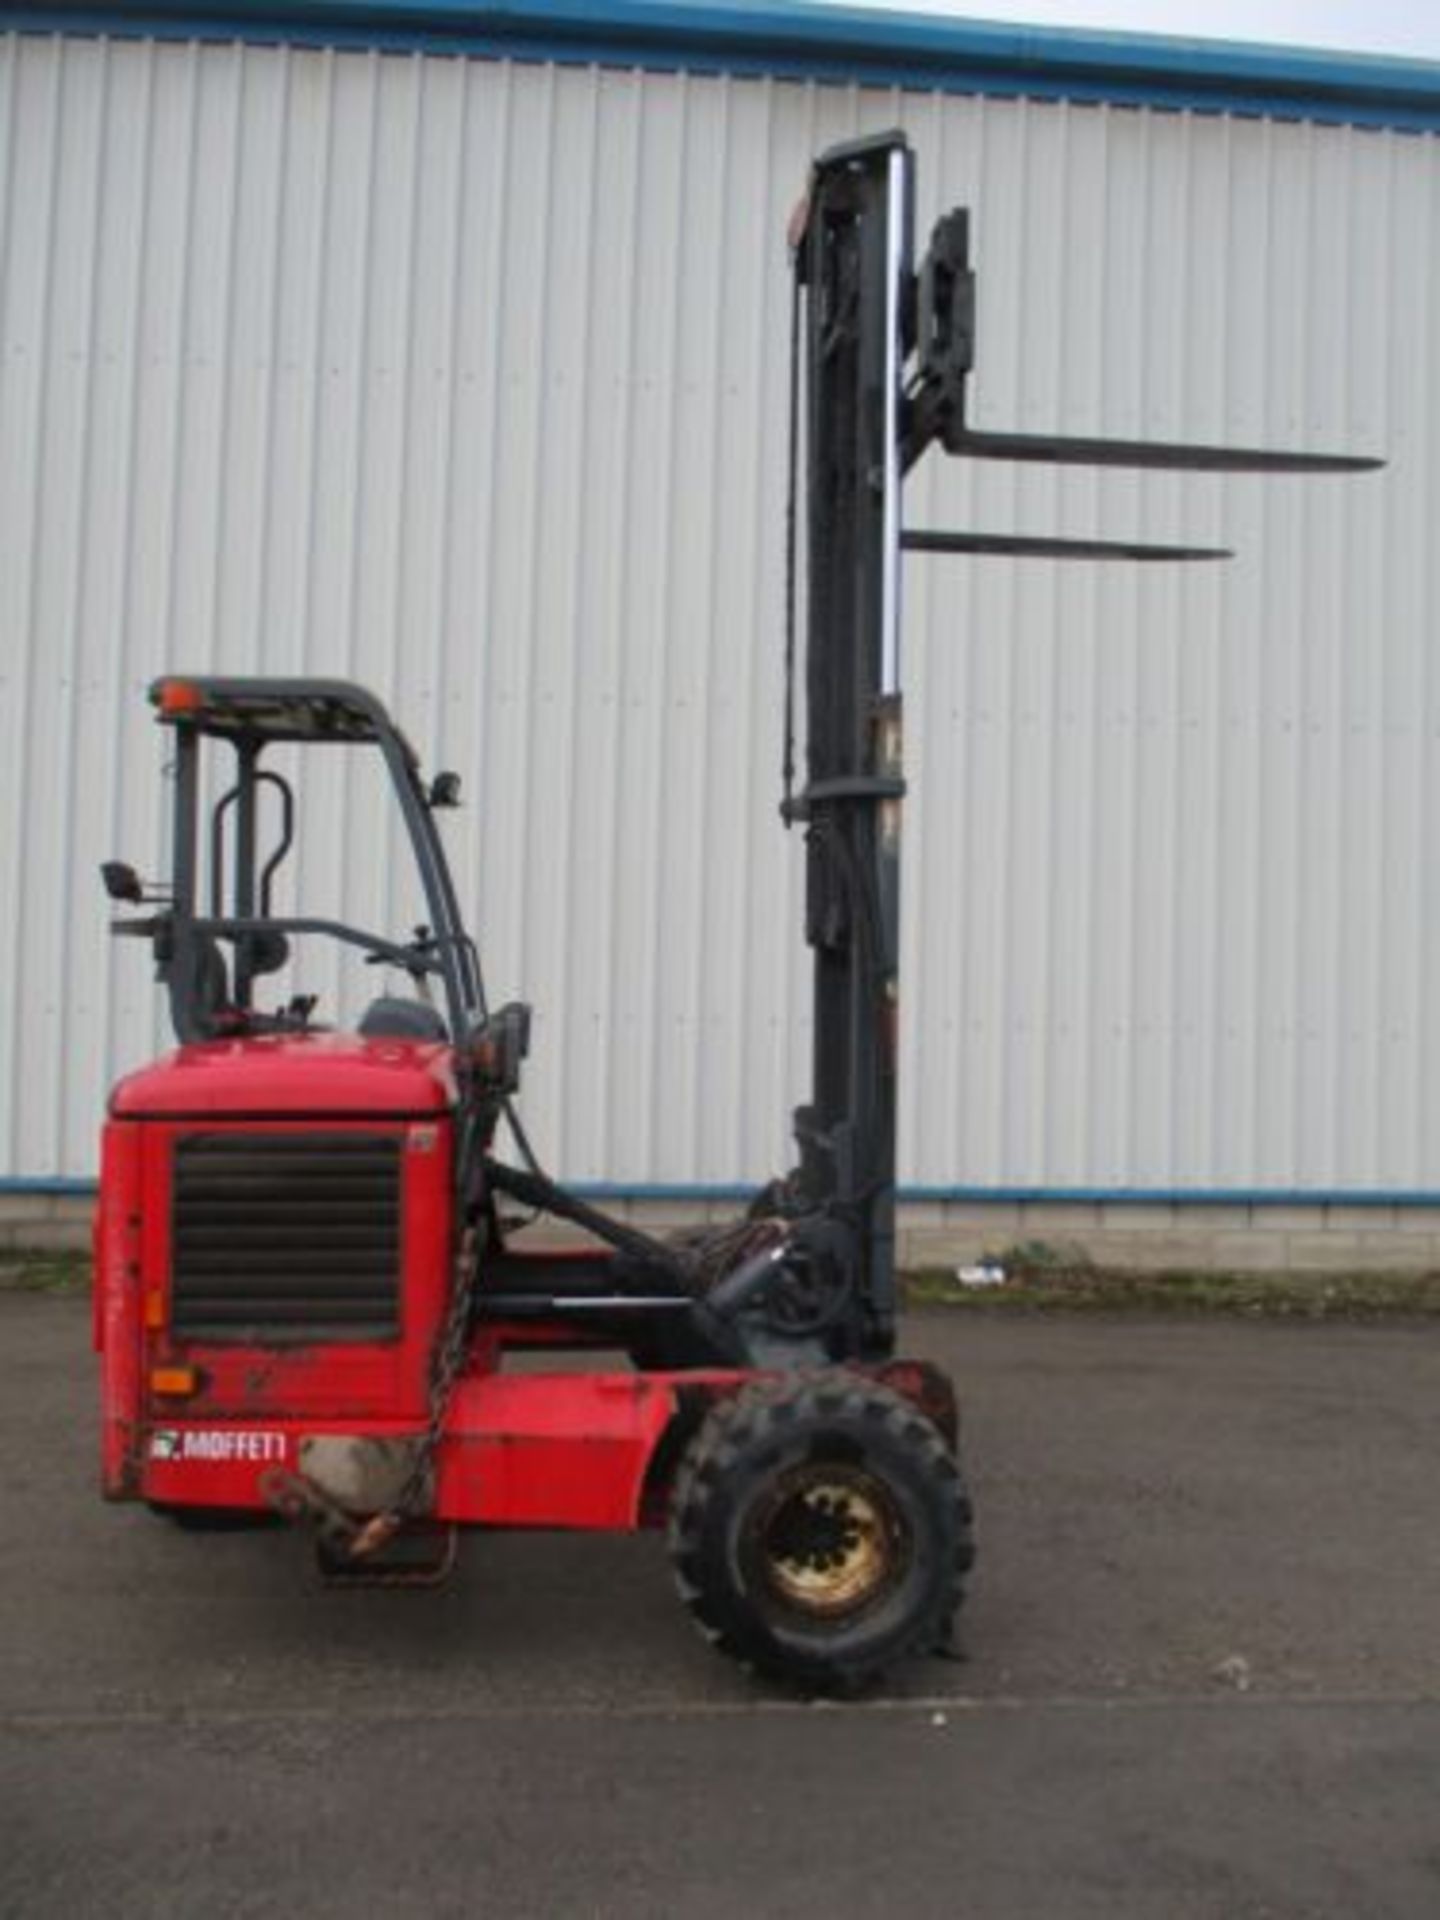 2009 MOFFETT MOUNTY M5 20.3 FORK LIFT FORKLIFT TRUCK MOUNTED LOLER DELIVERY - Image 2 of 8